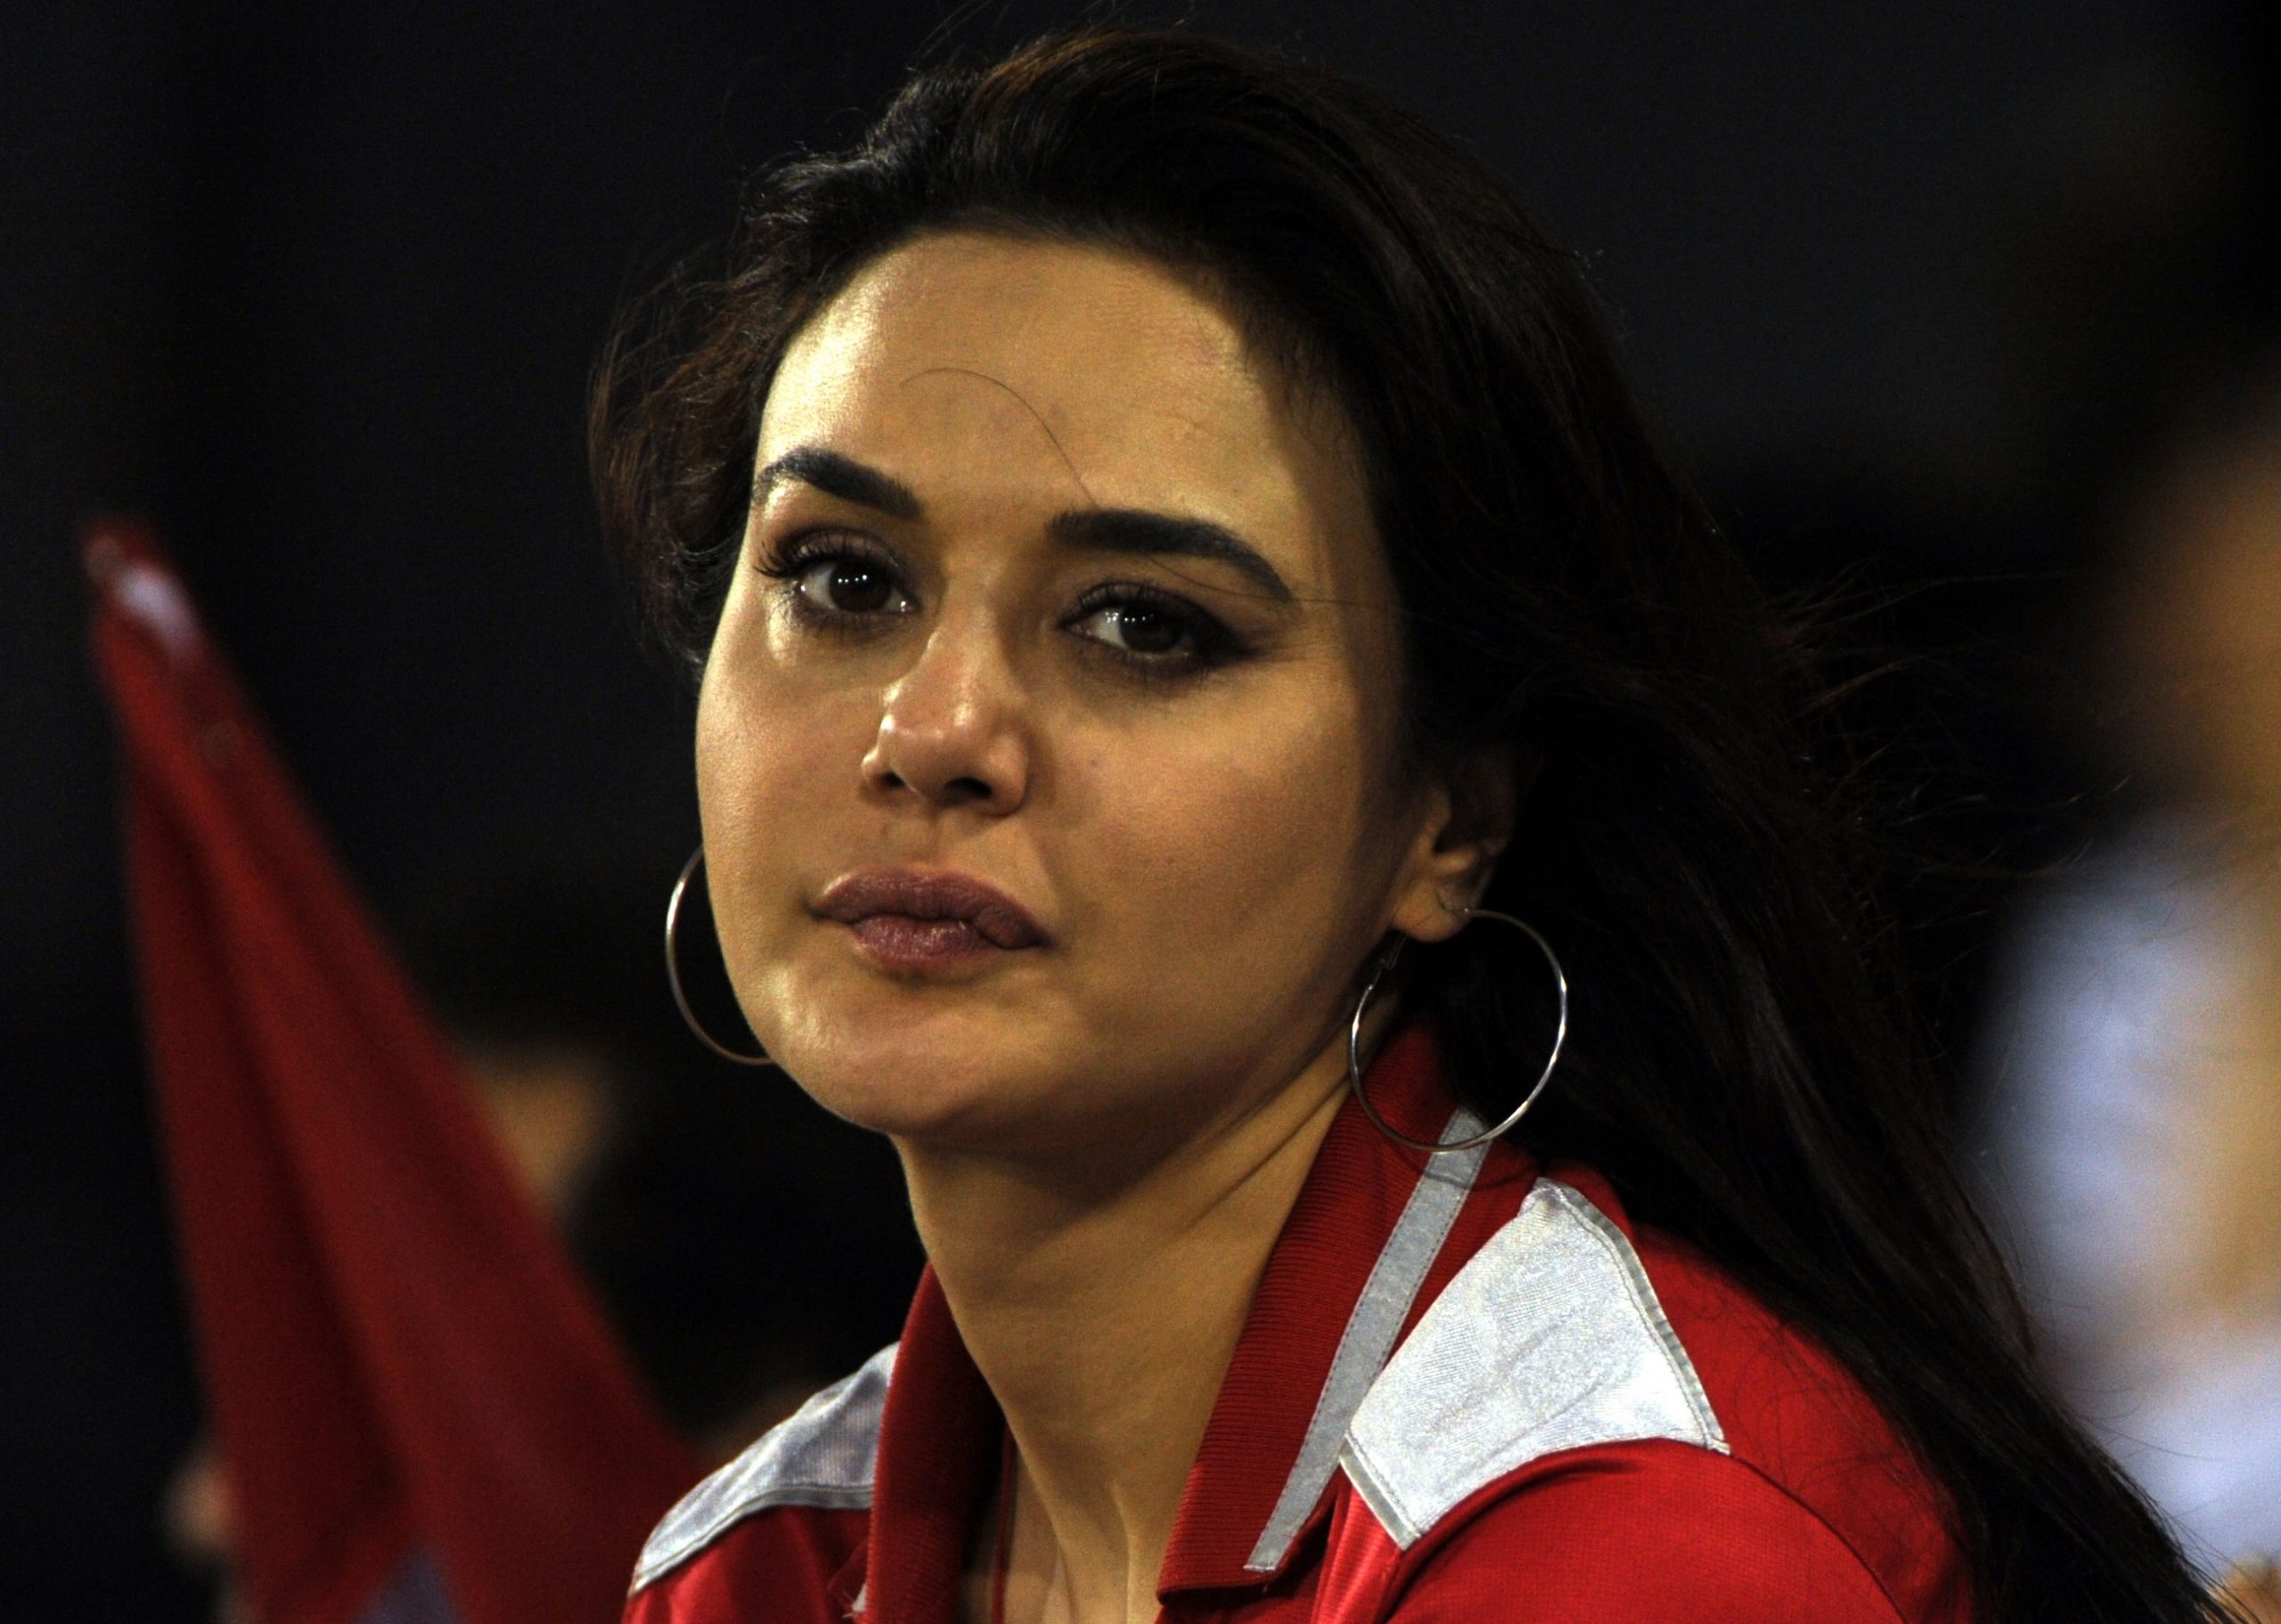 Preity Zinta Reacts After Punjab Kings Close Win Over Rajasthan Royals In Campaign Opener